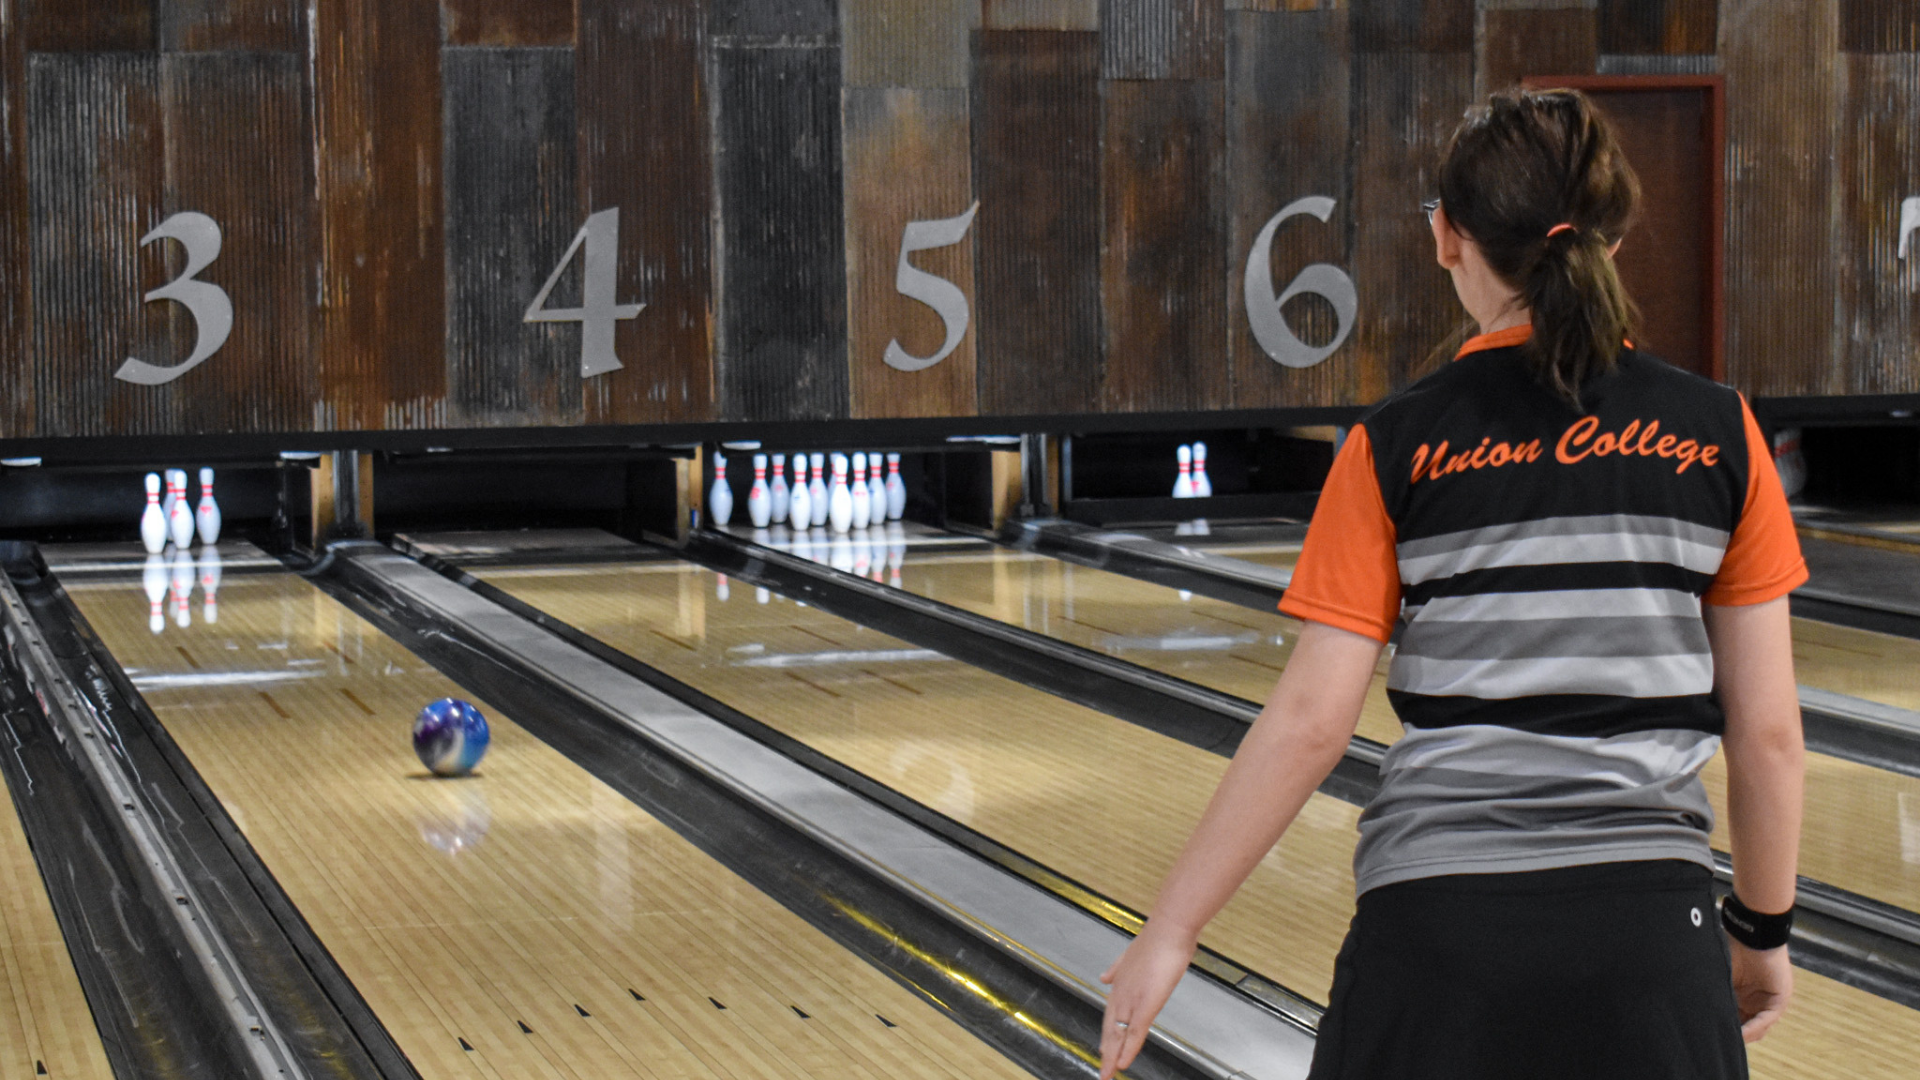 Union women’s bowling recap from the Columbia 300 Western Shootout